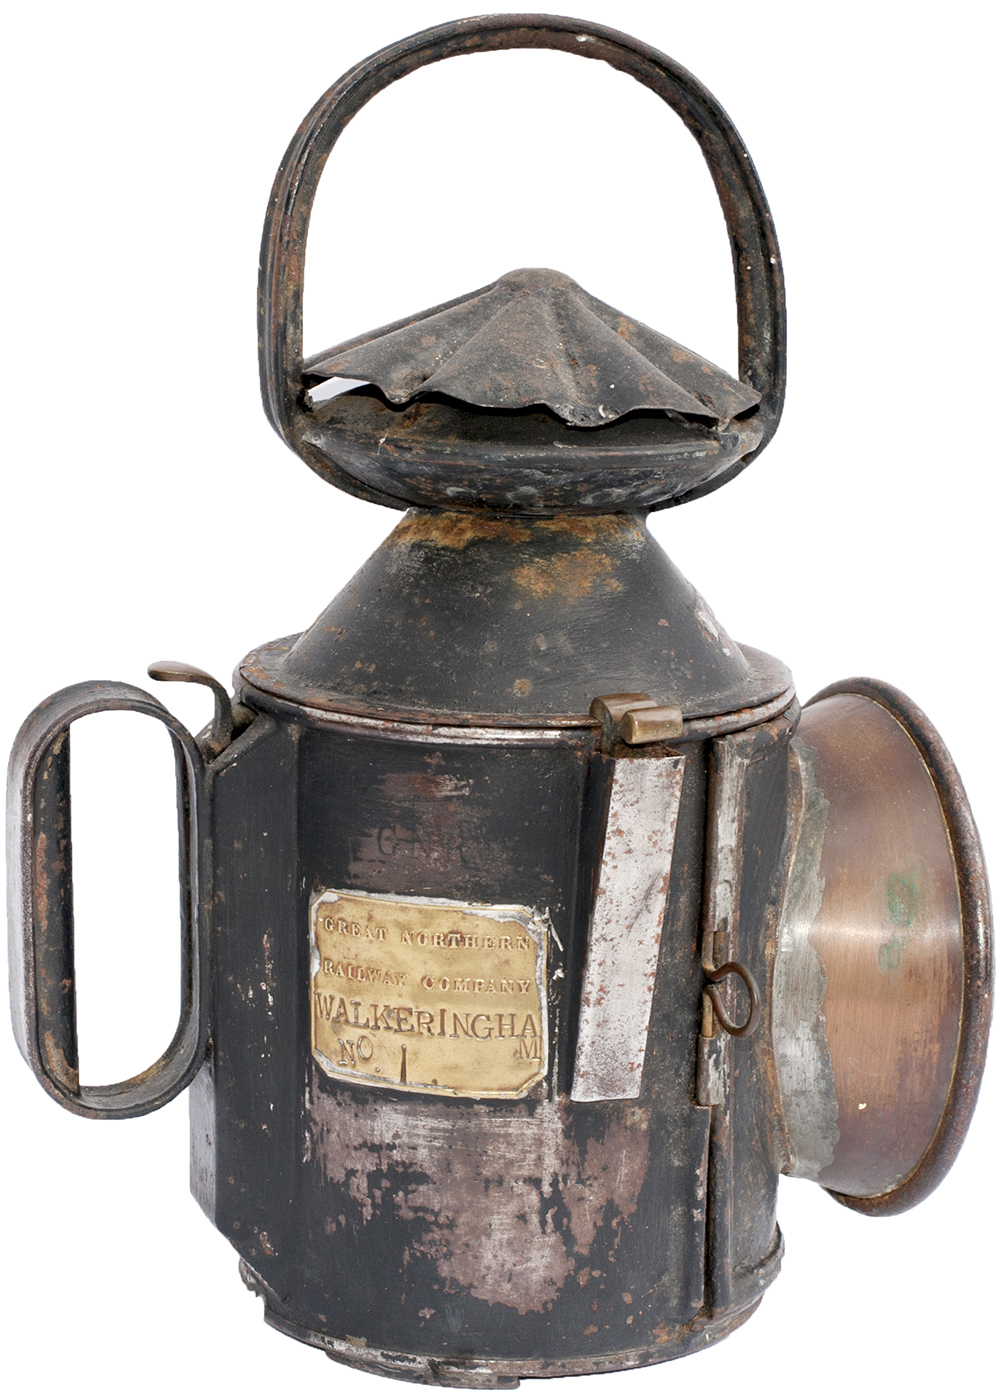 GNR 3 Aspect large pattern handlamp brass plated on the side GREAT NORTHERN RAILWAY COMPANY